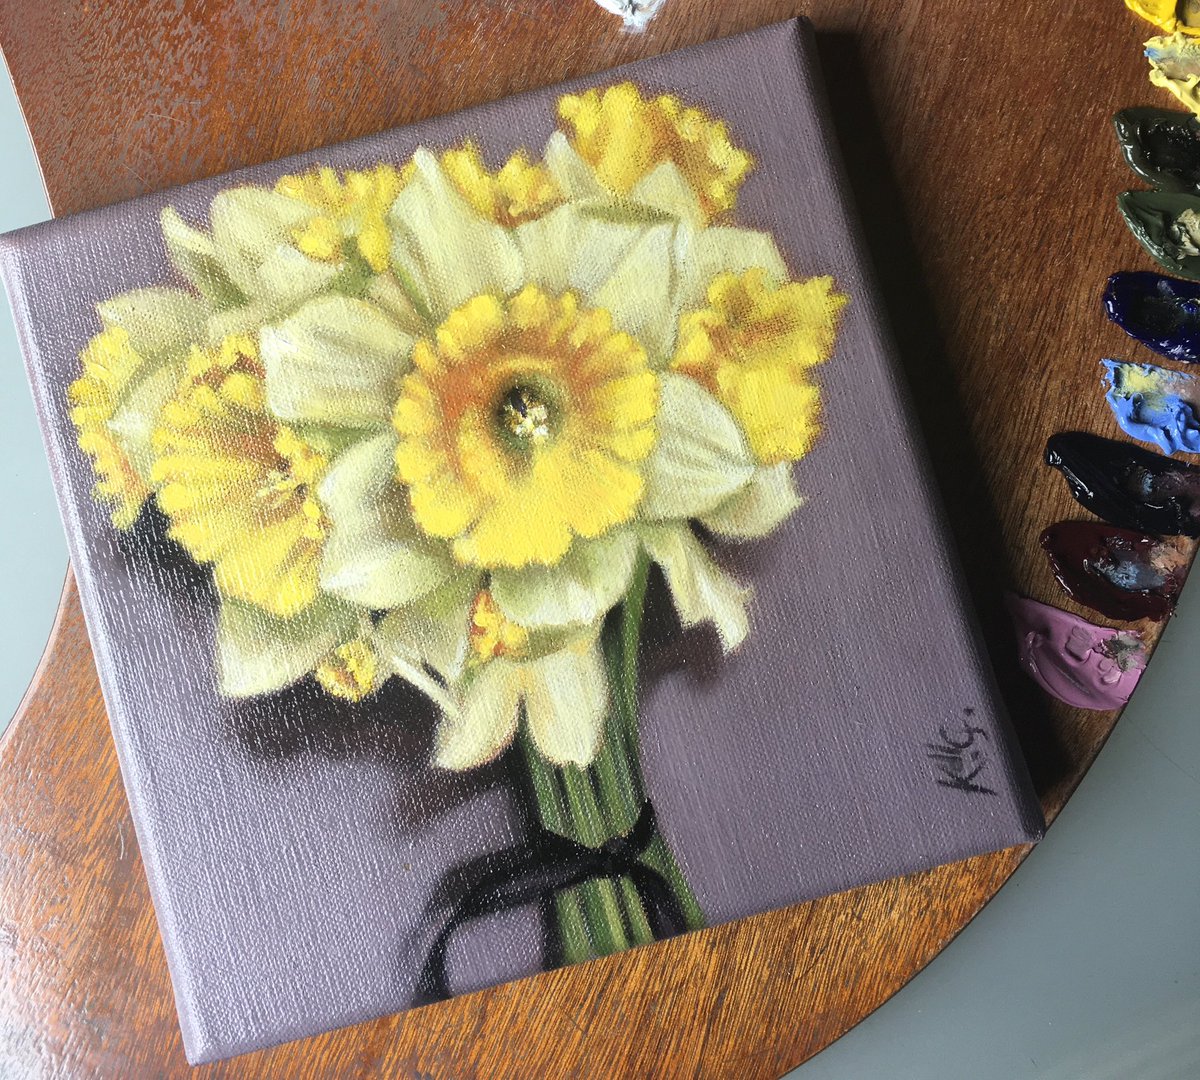 Varnish day for this tiny Spring flower study 💛

Paintings make the best gifts - this one will be gifted to a dear friend tomorrow 🌟

#oilpainting #allaprima #flower #study #artwork #varnishday #originalart #buyart #artcollector #supportingartists #fridaymorning